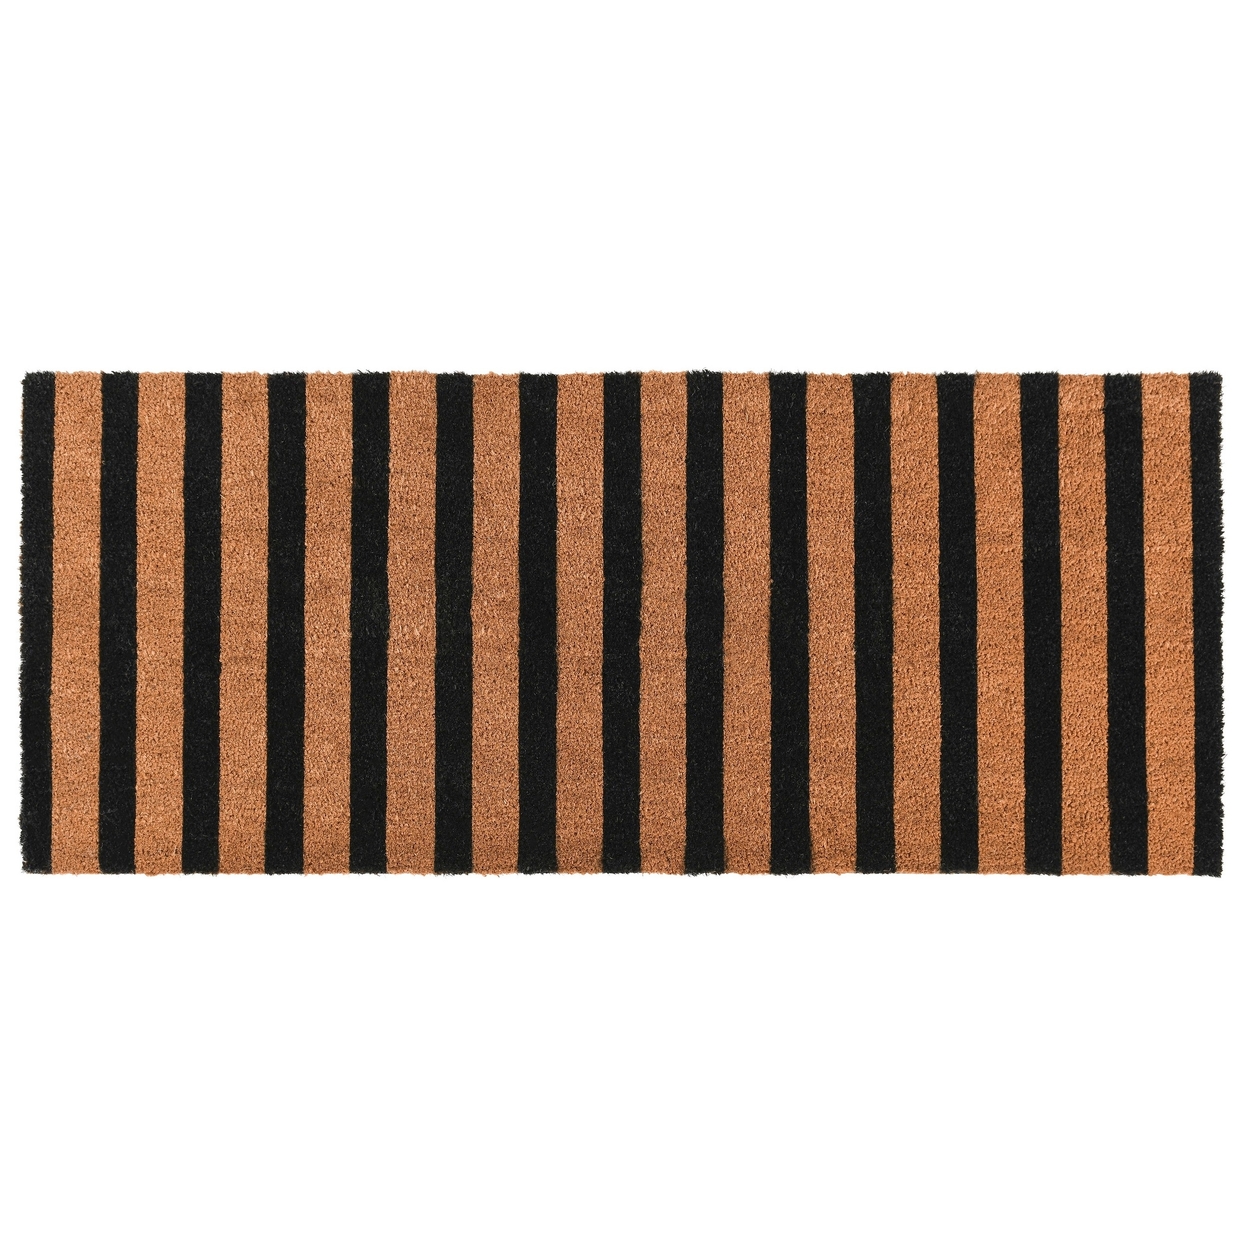 Oy 24 X 57 Coir Doormat With Brown And Black Striped Pattern, PVC Backing- Saltoro Sherpi